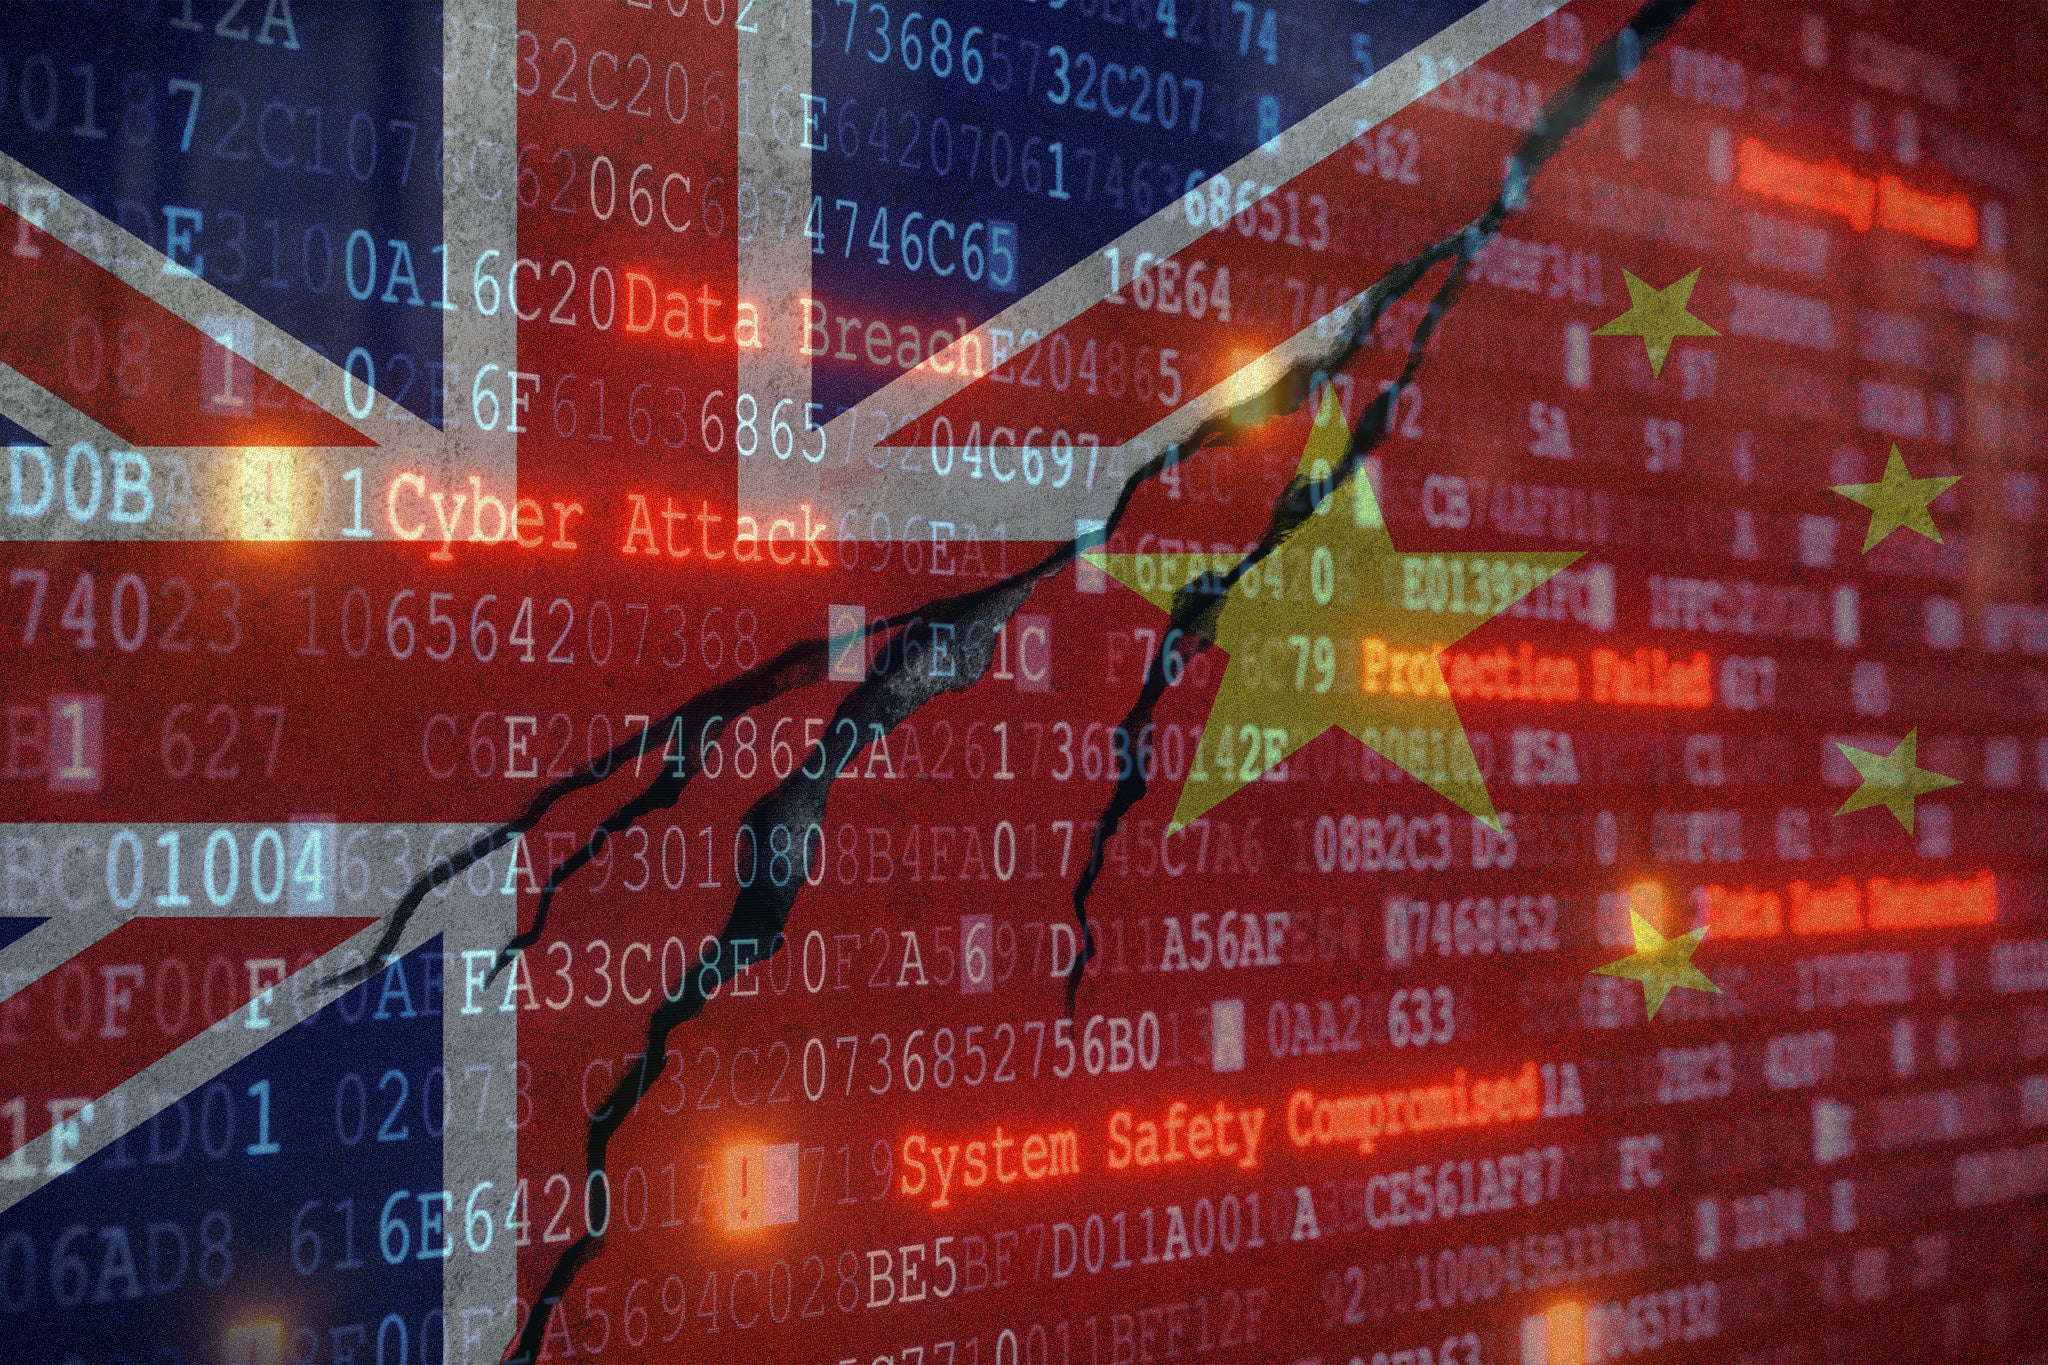 A massive cyberattack was revealed to have targeted the UK’s Ministry of Defence